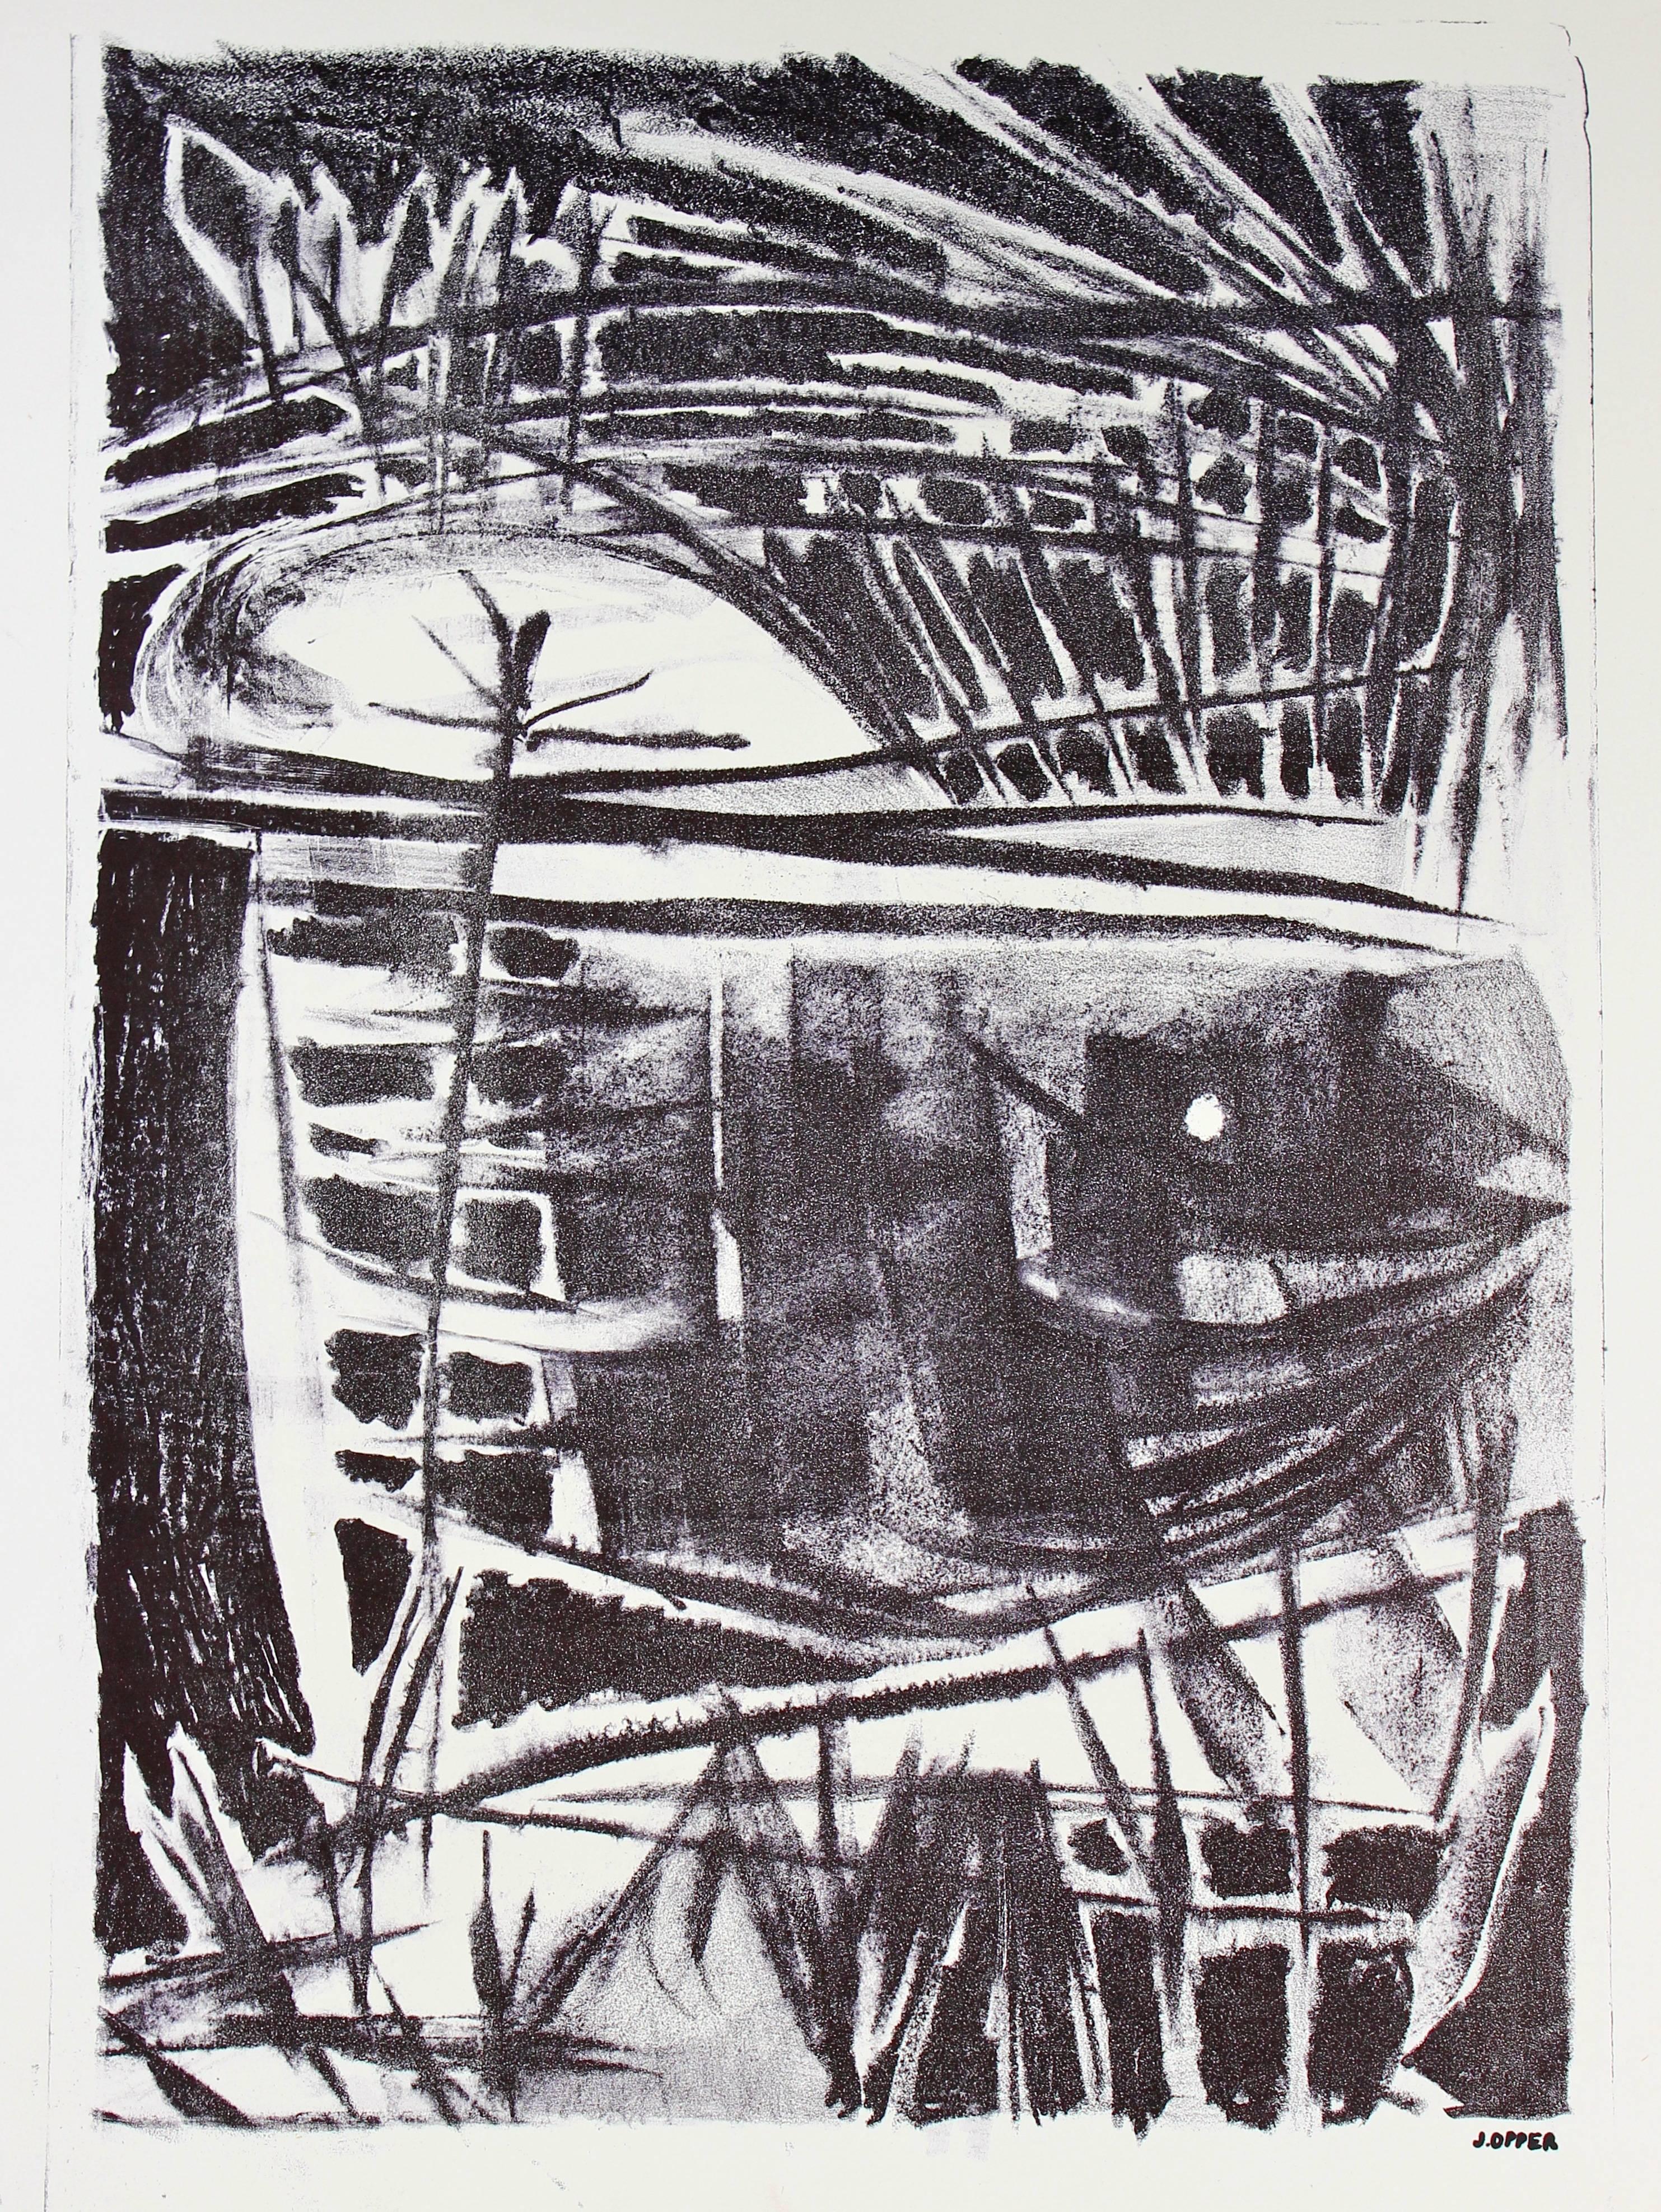 Jerry Opper Abstract Print - Black & White Modernist Abstract Lithograph, Mid-Century